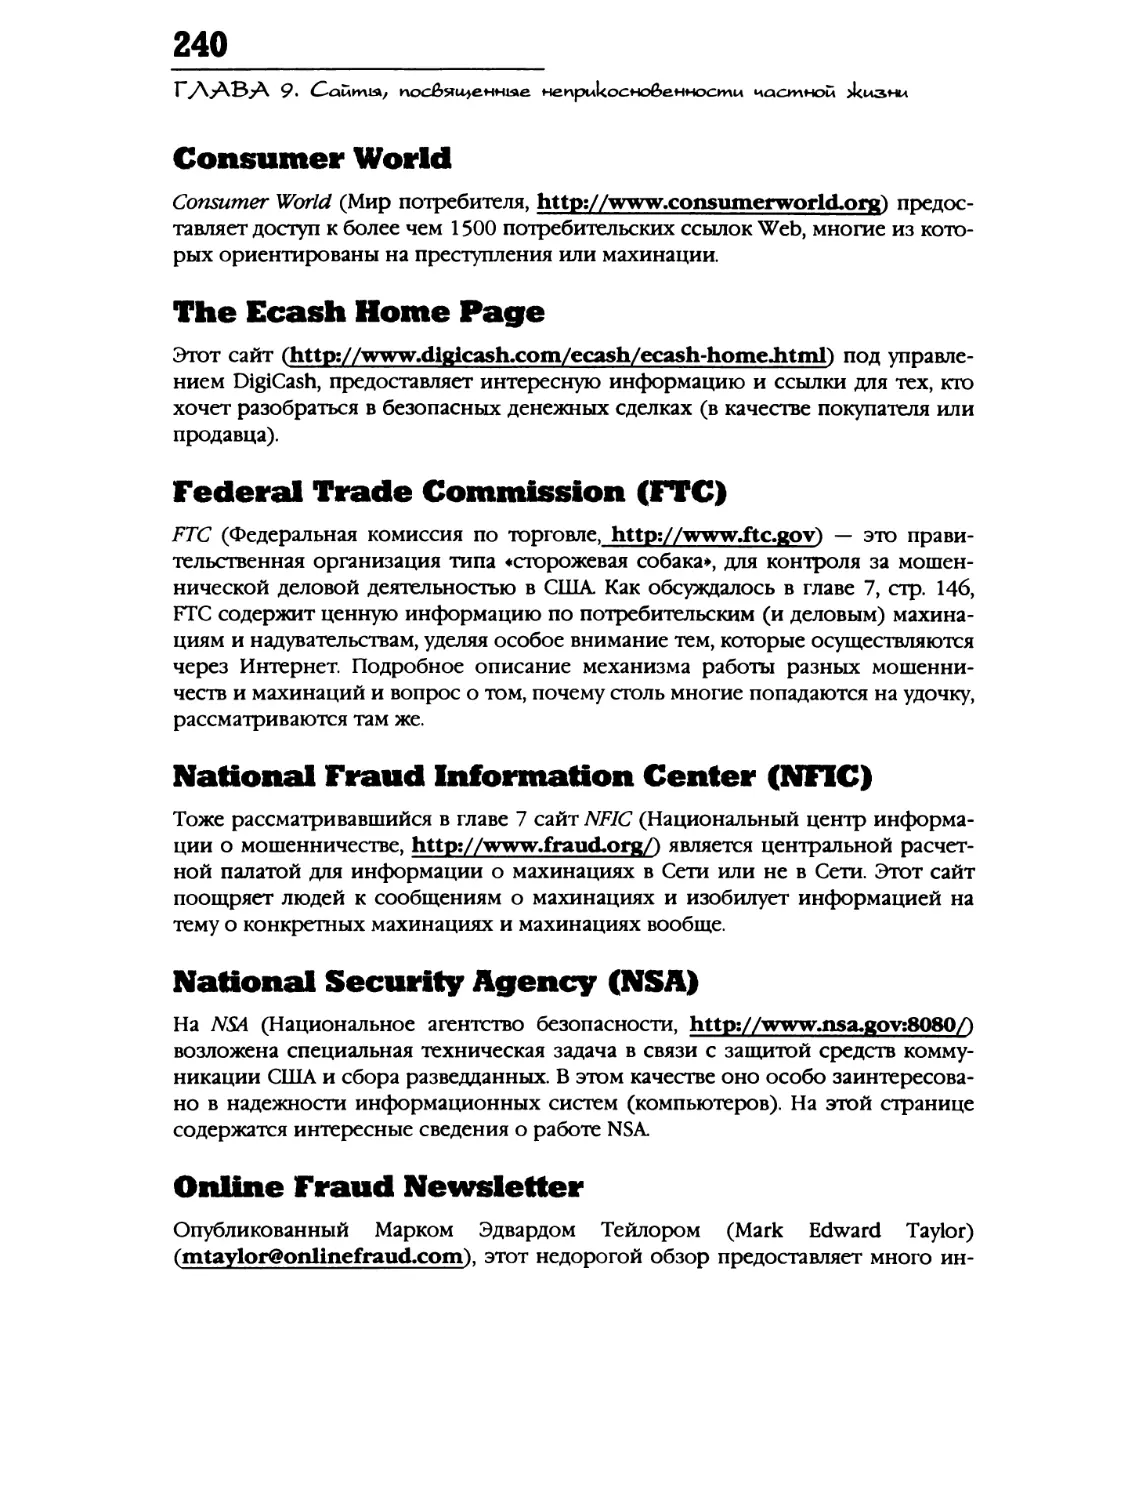 Consumer World
The Ecash Home Page
Online Fraud Newsletter